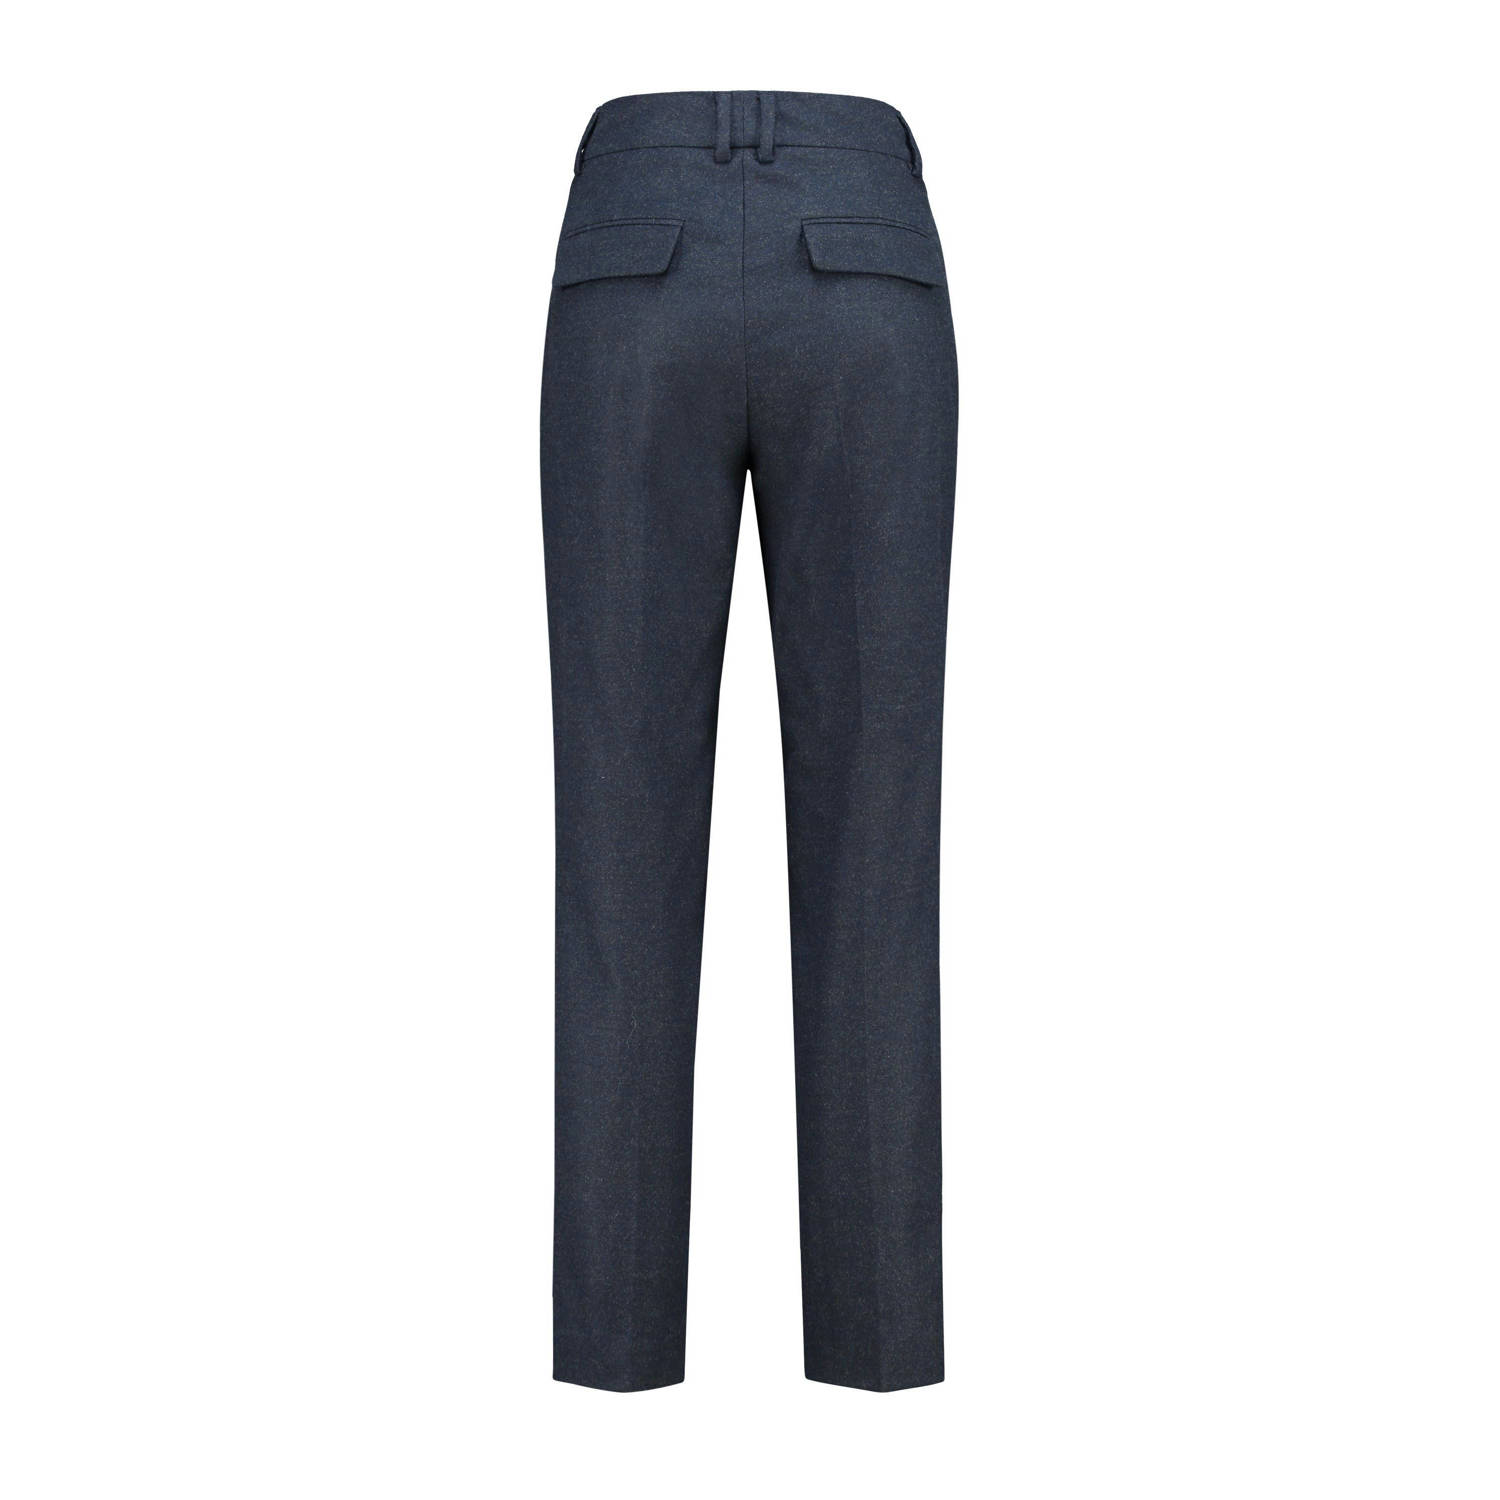 Claudia Sträter tapered fit broek blauw